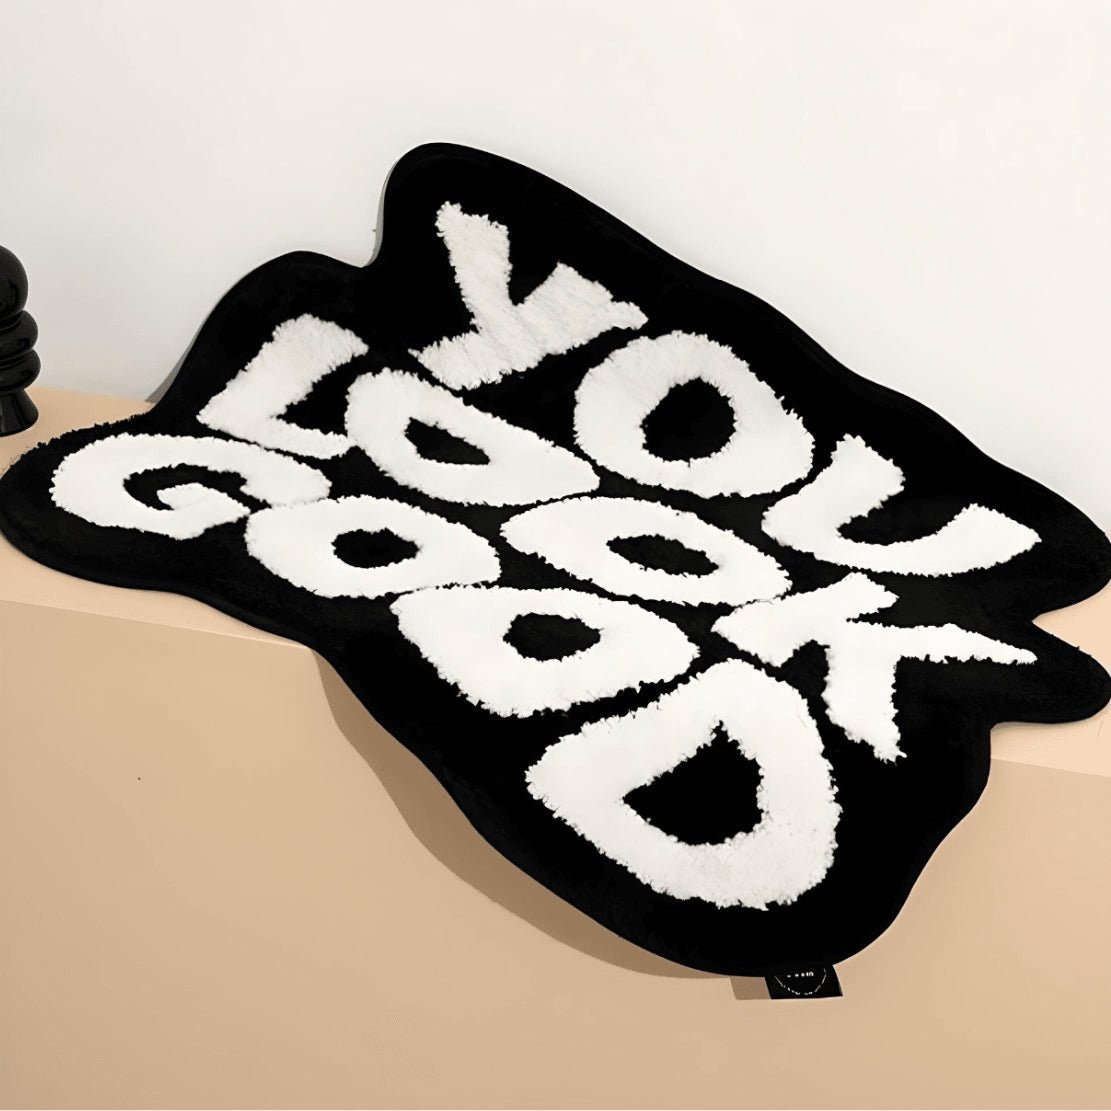 Black & white "You Look Good" text floor rug